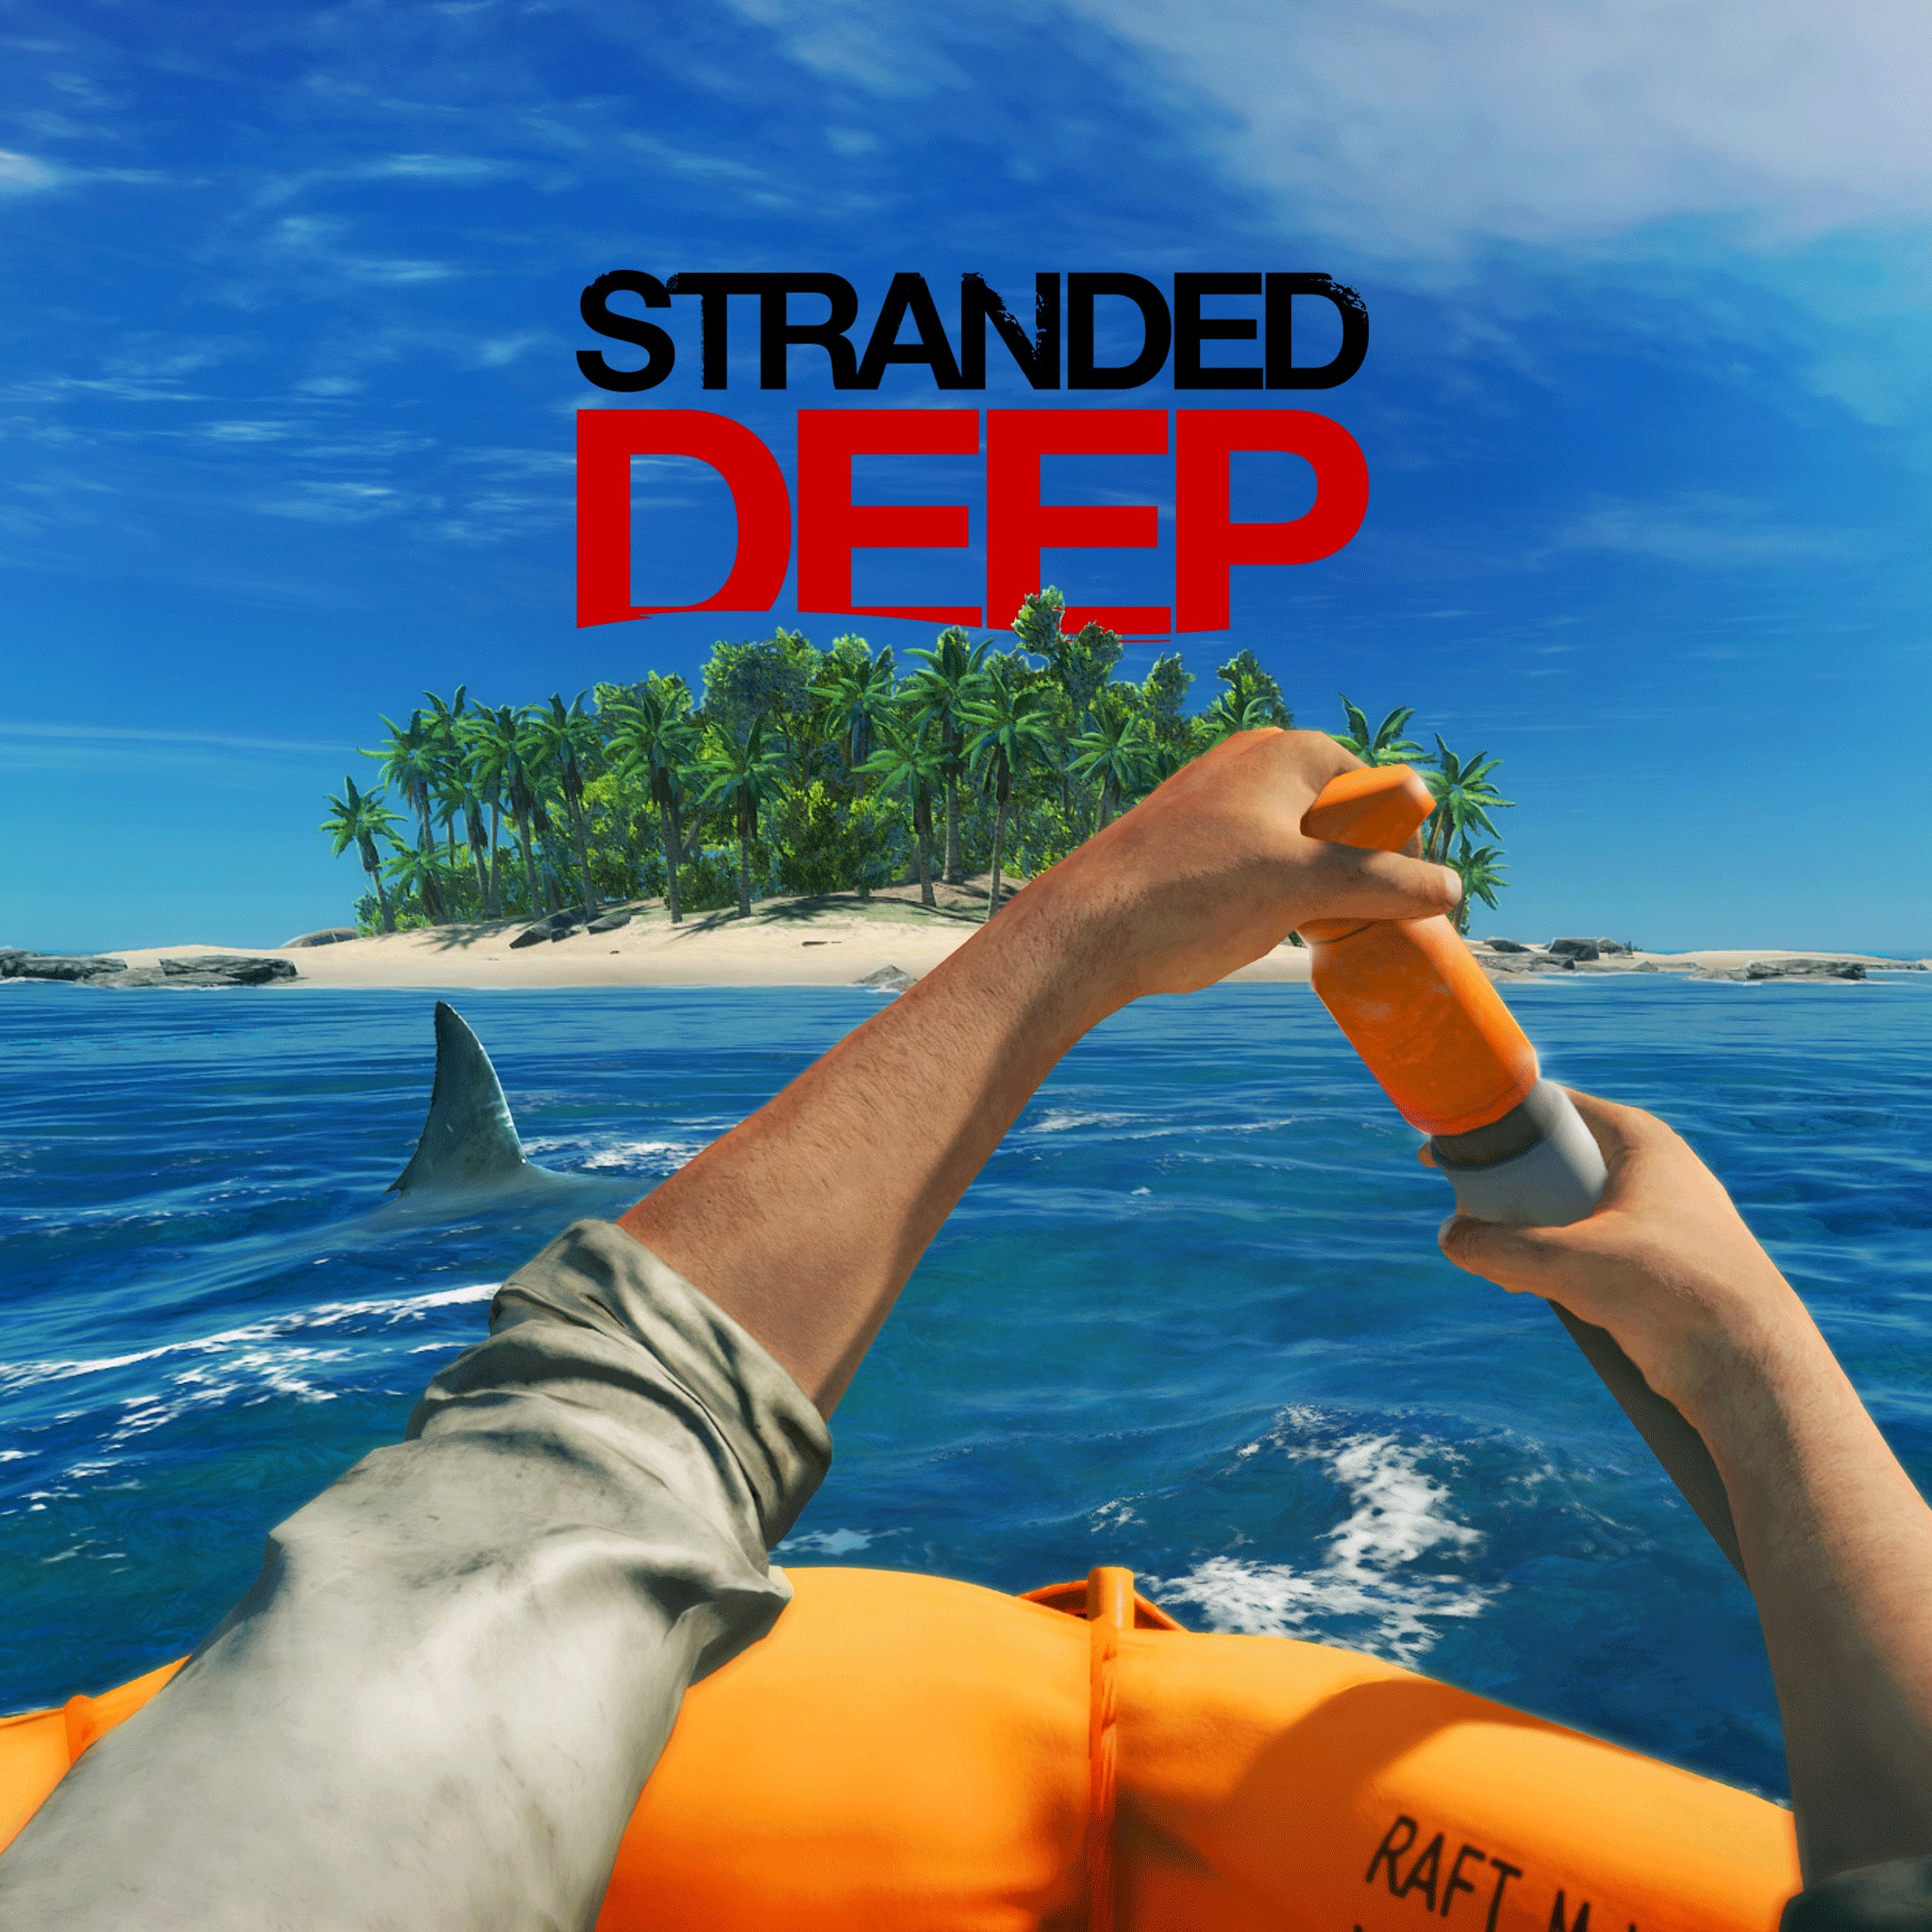 PS4 Stranded Deep $19.99